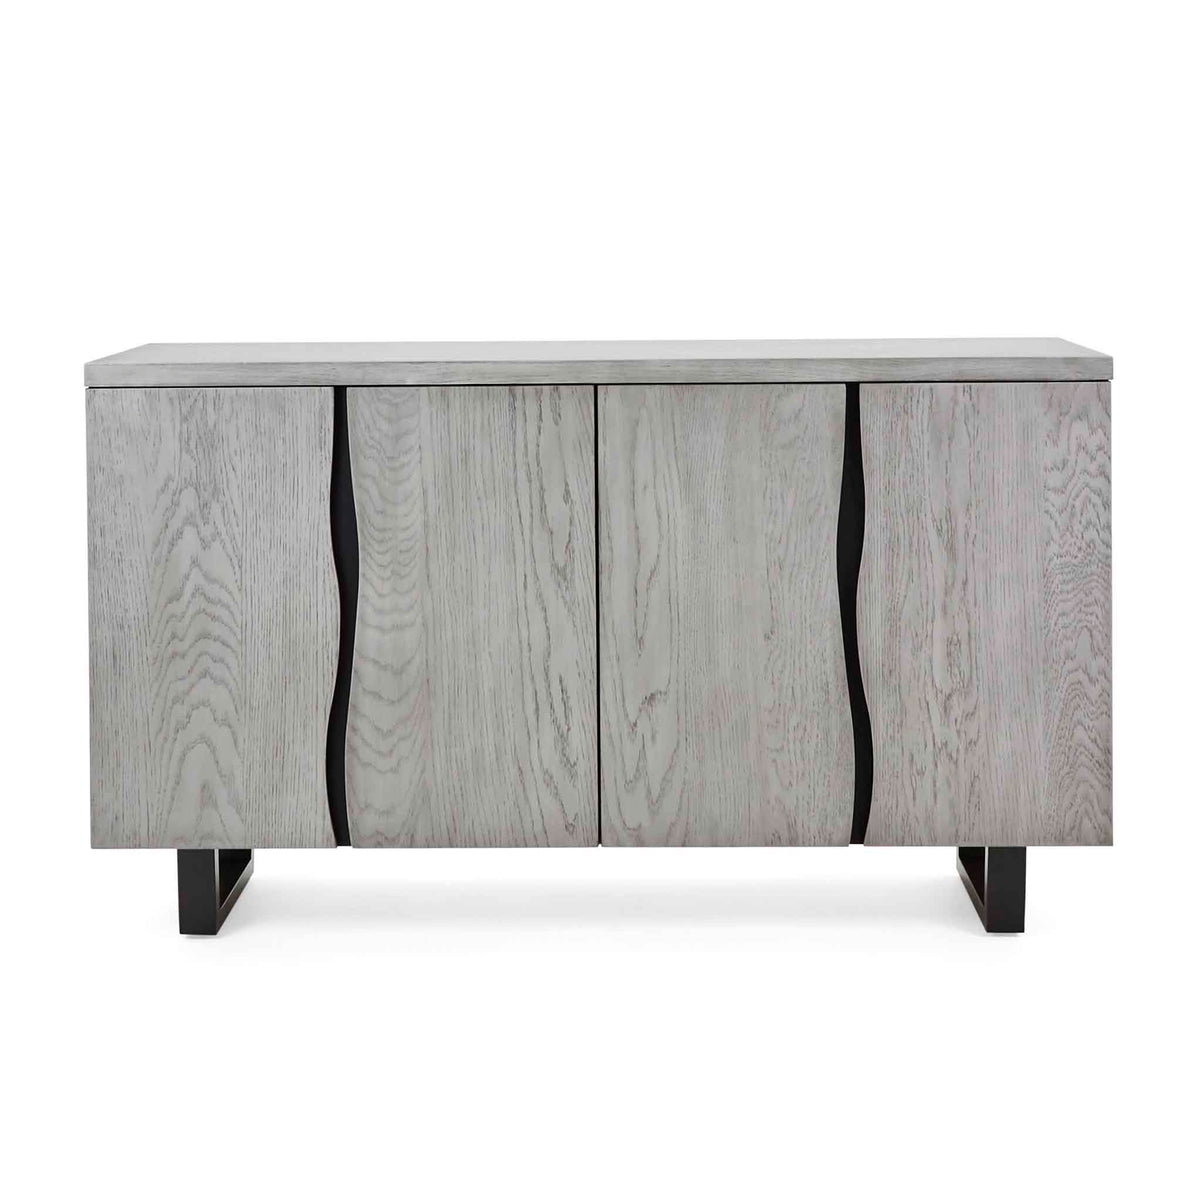 Soho Large Sideboard - Front view